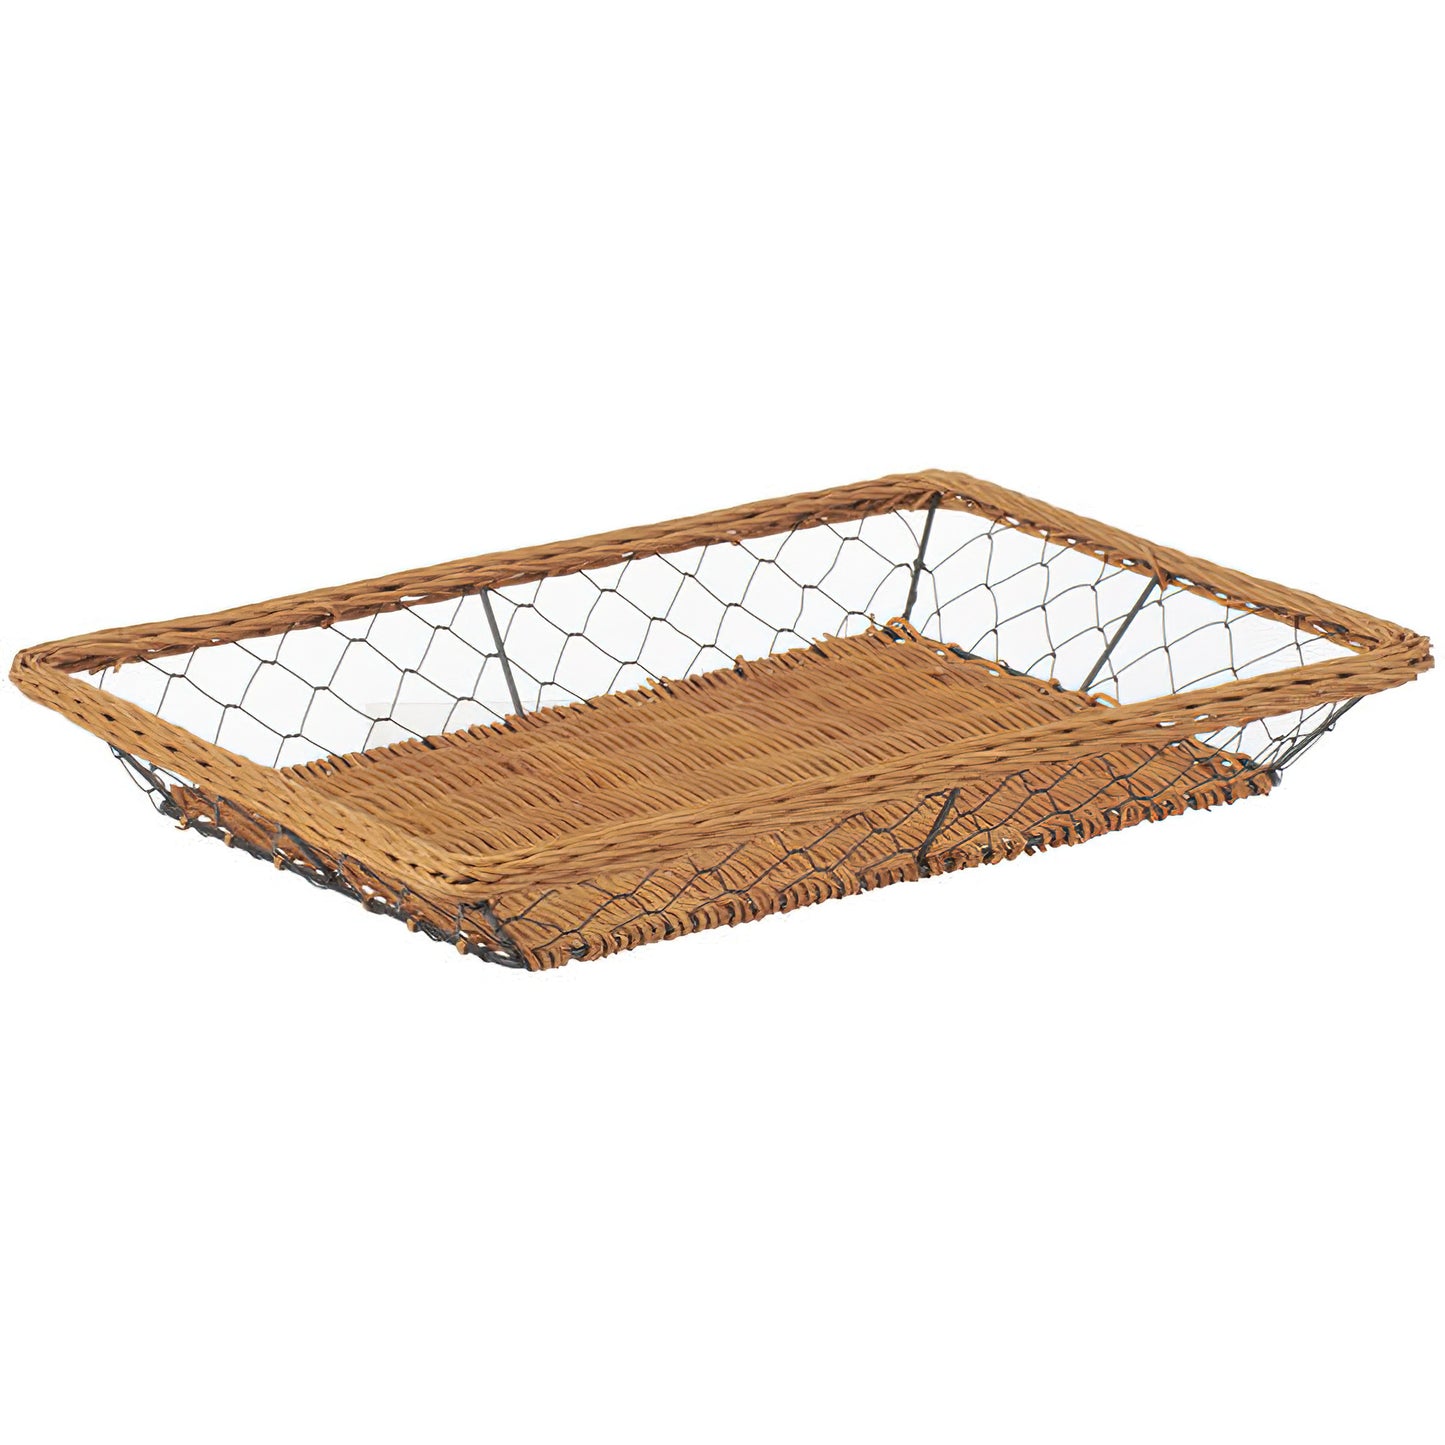 16.5" x 11.75" Rattan and Black Wire Basket, 2.5" Deep